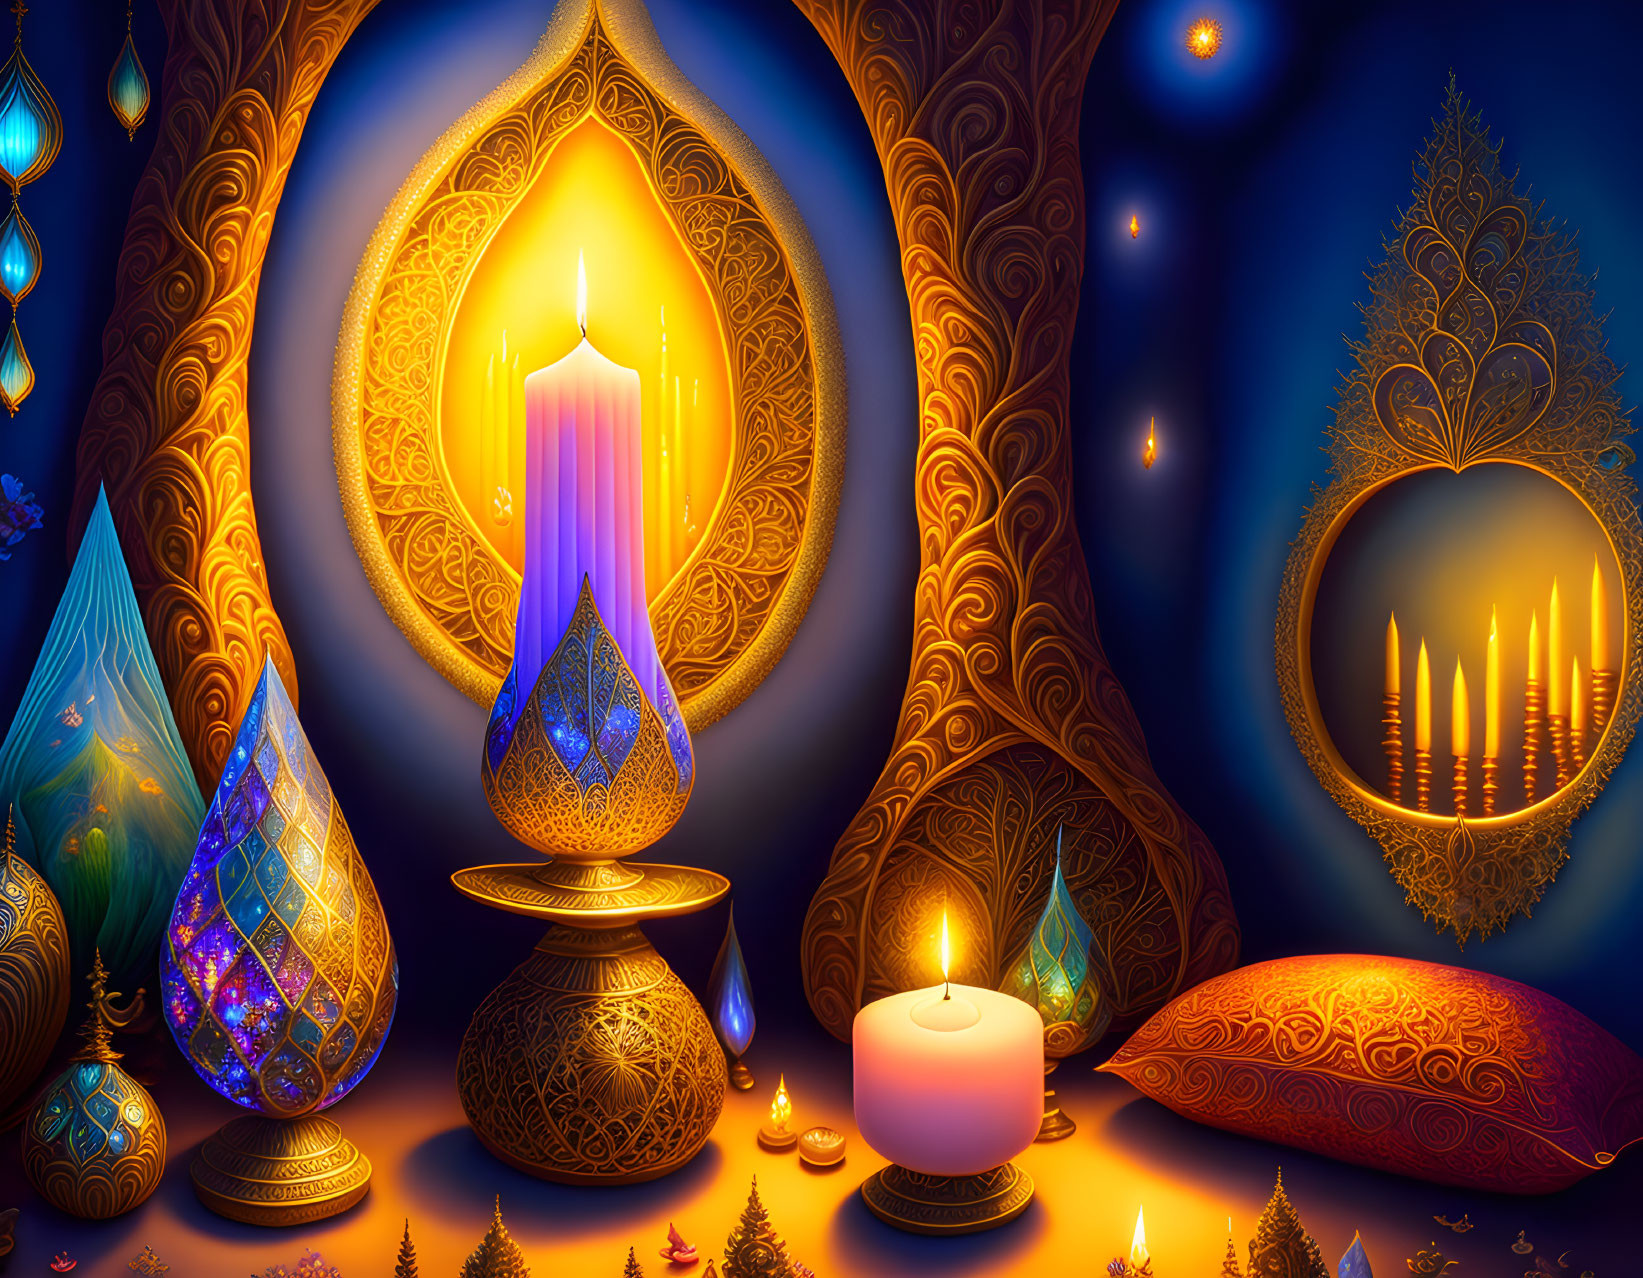 Colorful digital artwork: ornate lamps, candles, cushions, golden patterns, deep blue ambiance